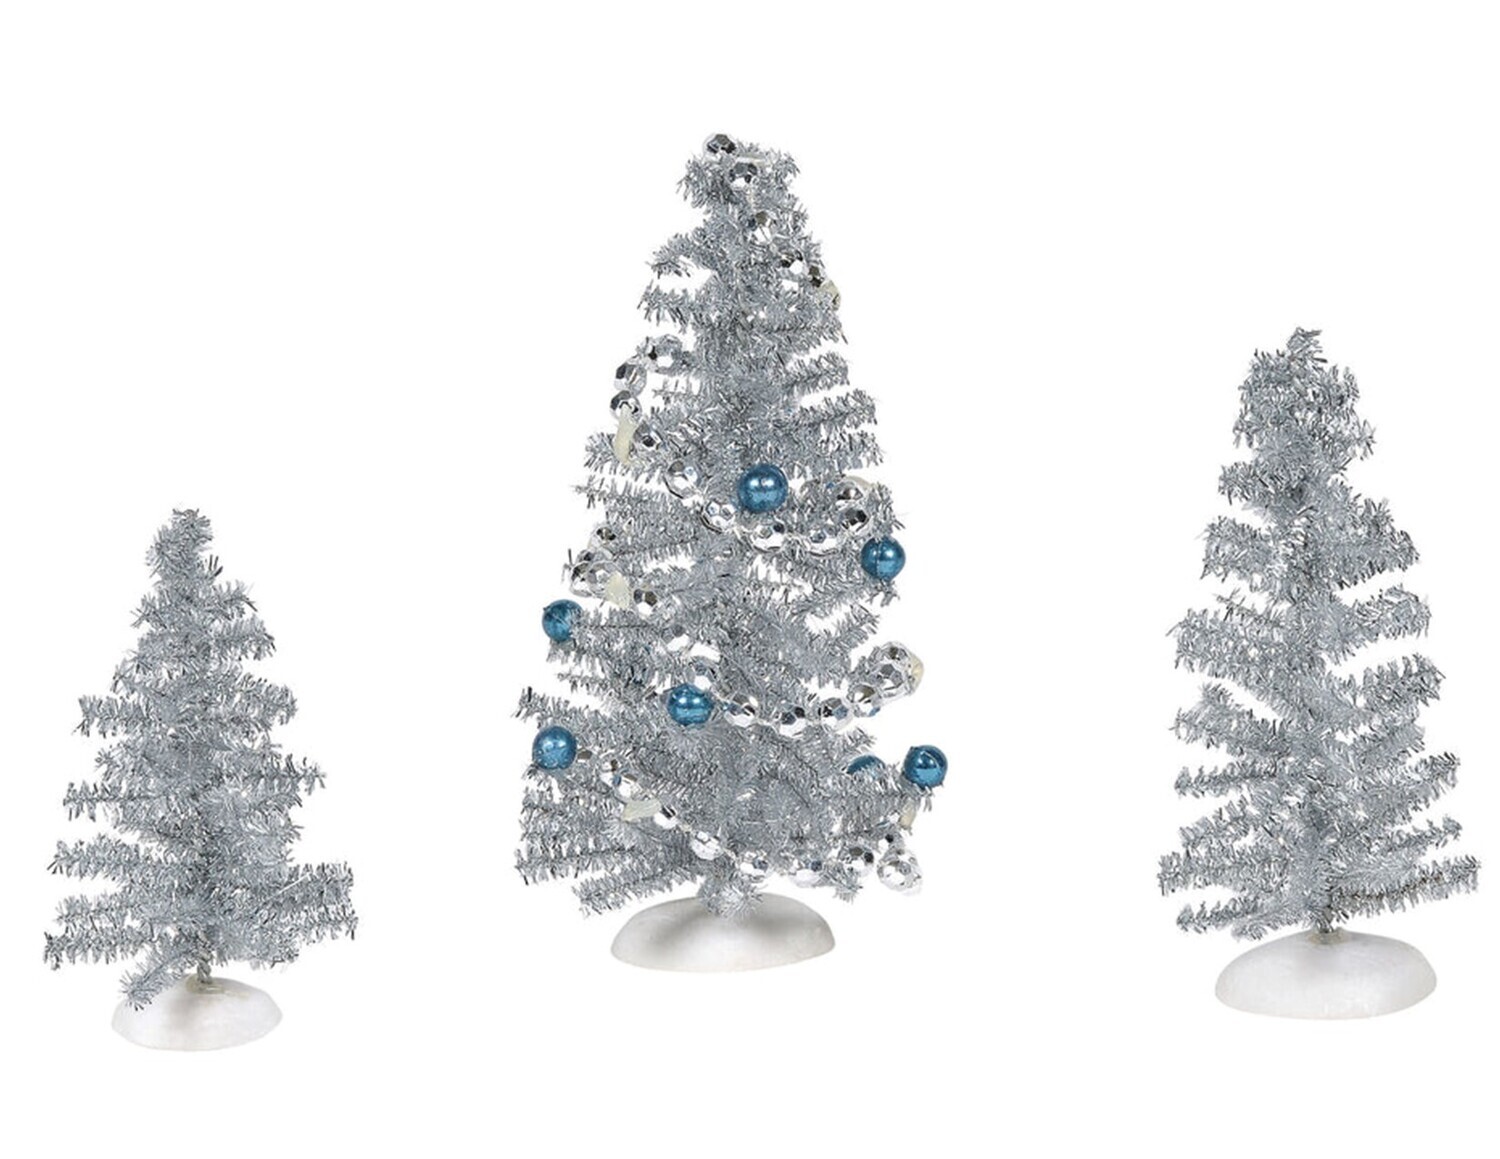 Department 56 "​Blue Christmas Tinsels - Set of 3" Village Accessories (6005541​)